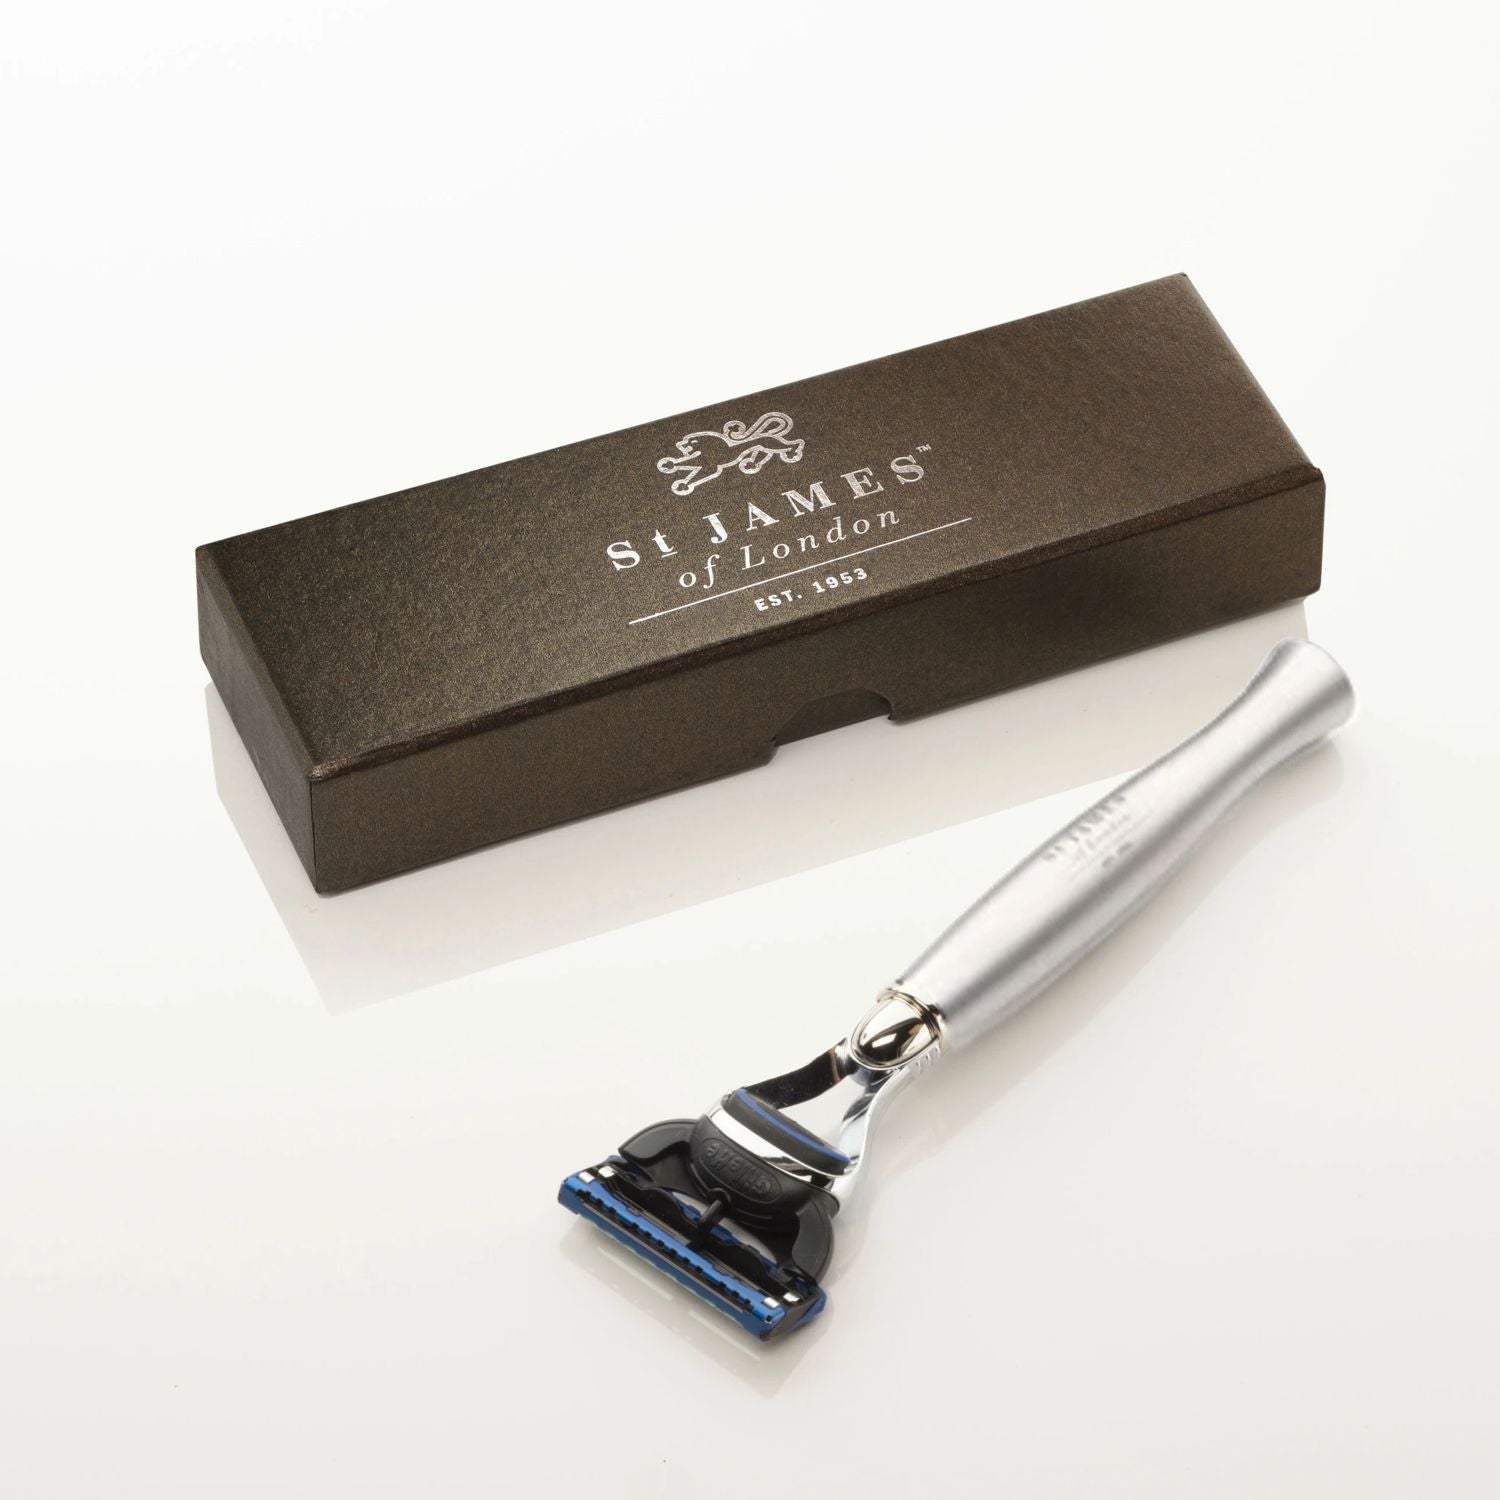 "Cheeky B'stard" Handcrafted 'Fusion' Razor in Brushed Metal by St. James of London